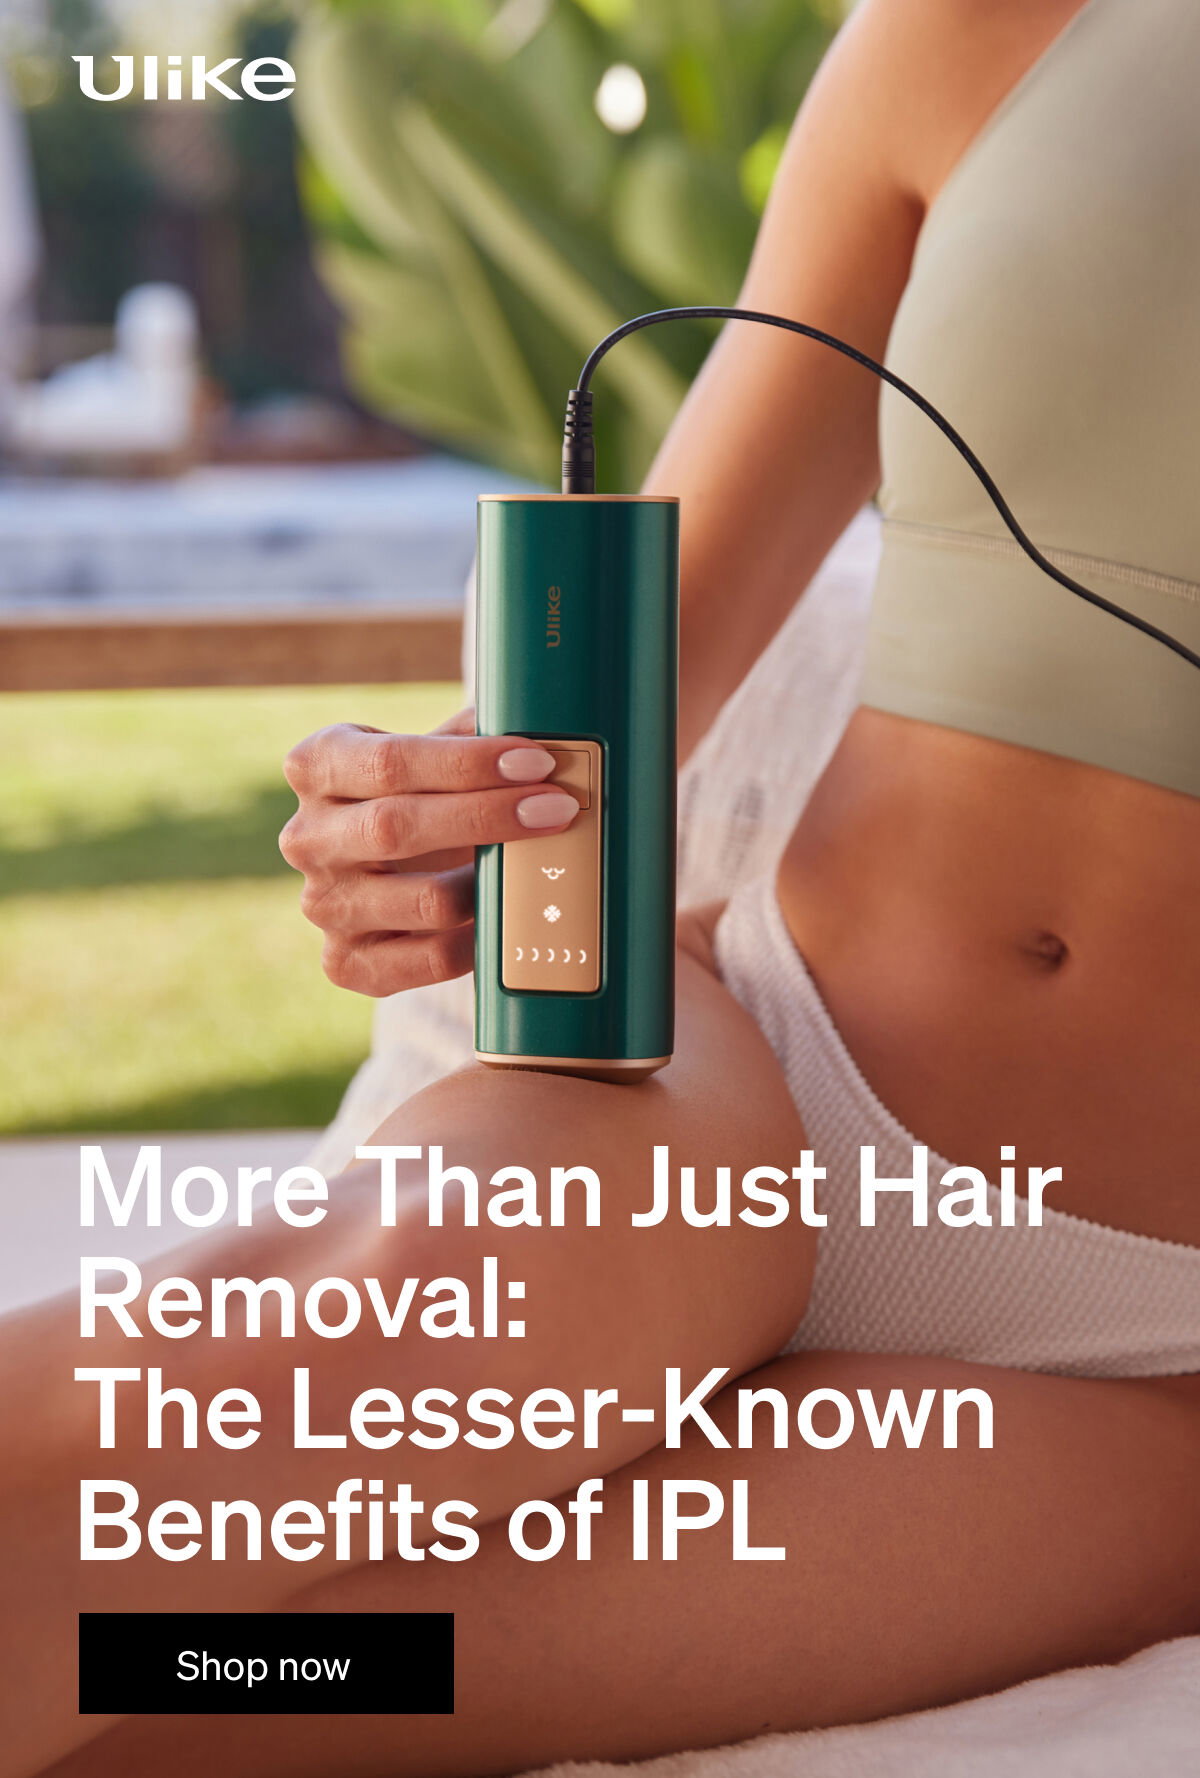 Ulike: More Than Just Hair Removal: The Lesser-Known Benefits of